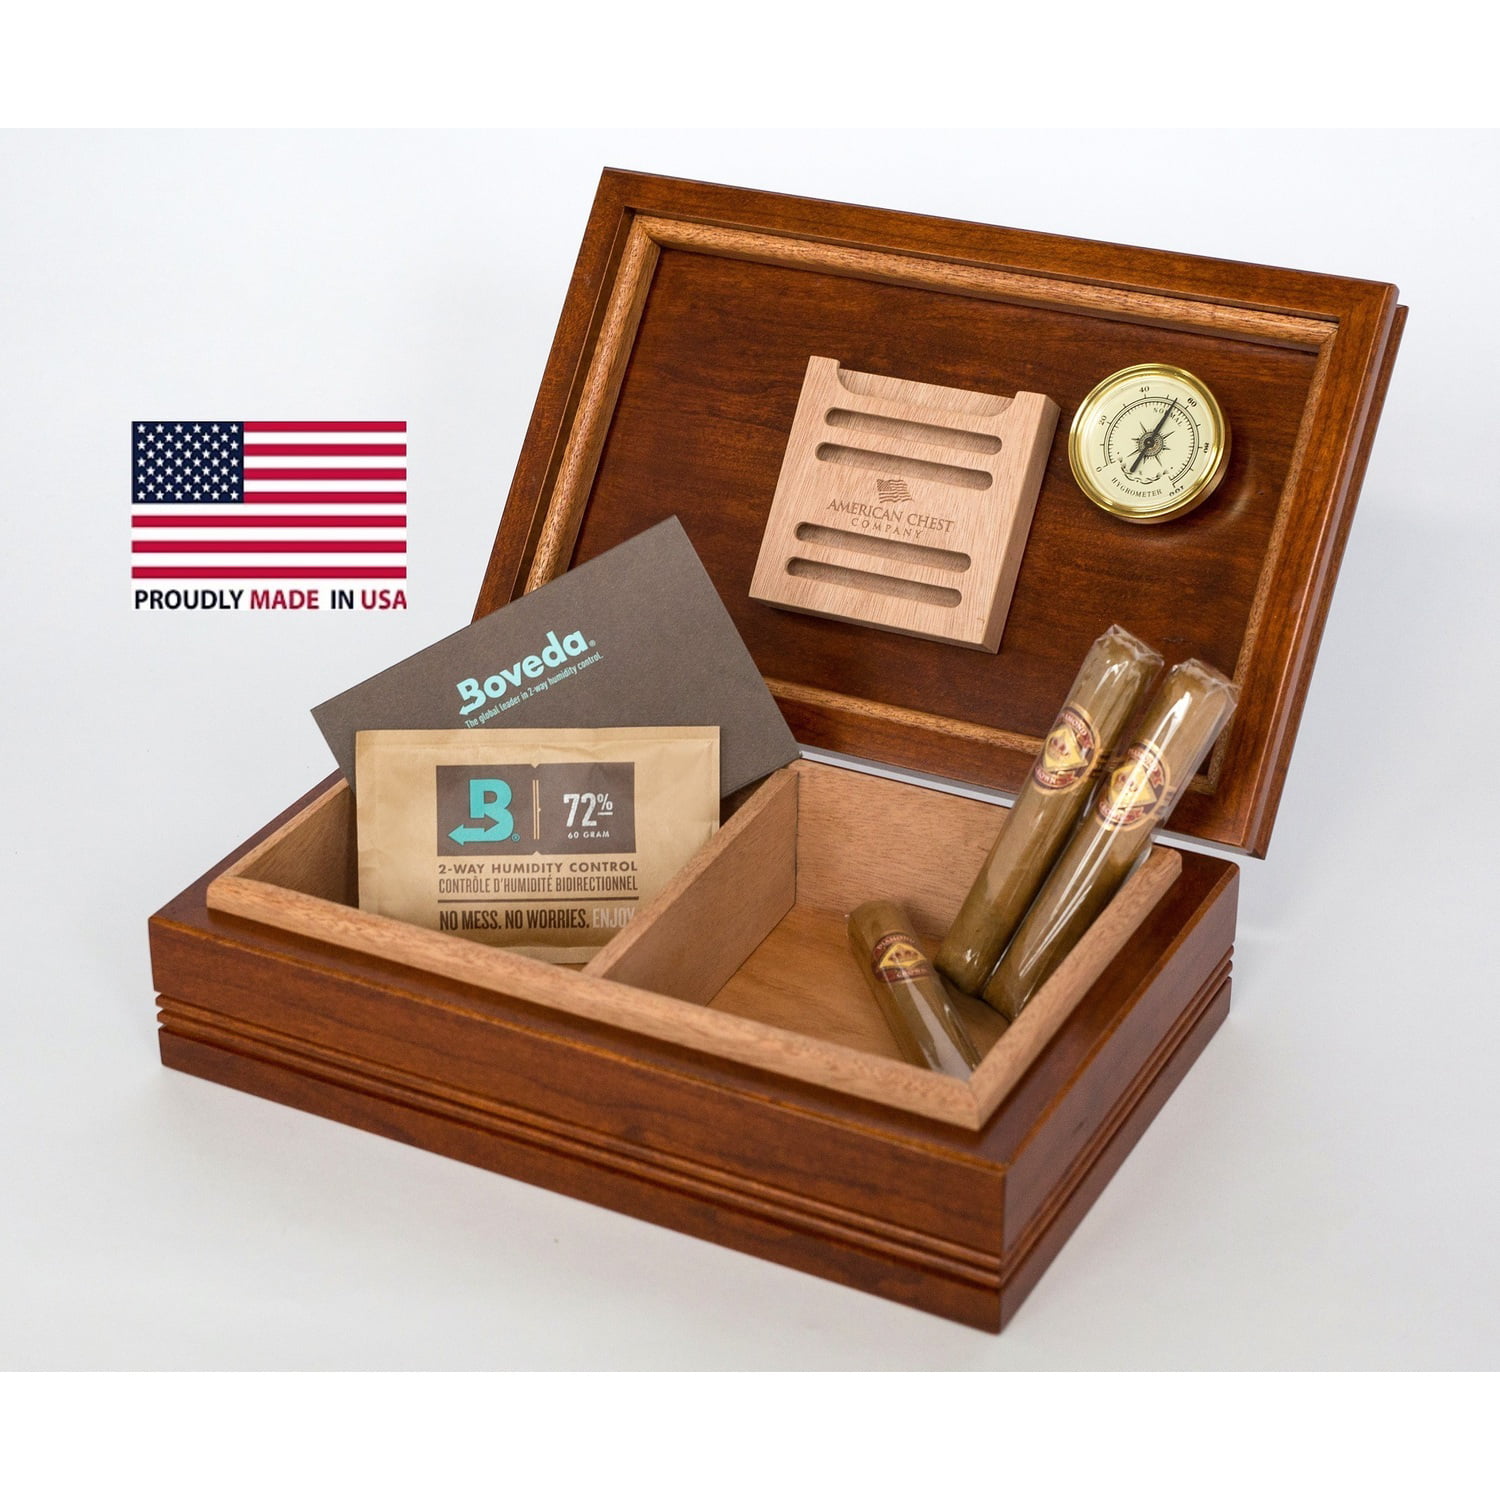 Picture of American Chest H50C 50 Count Amish Cigar Humidor